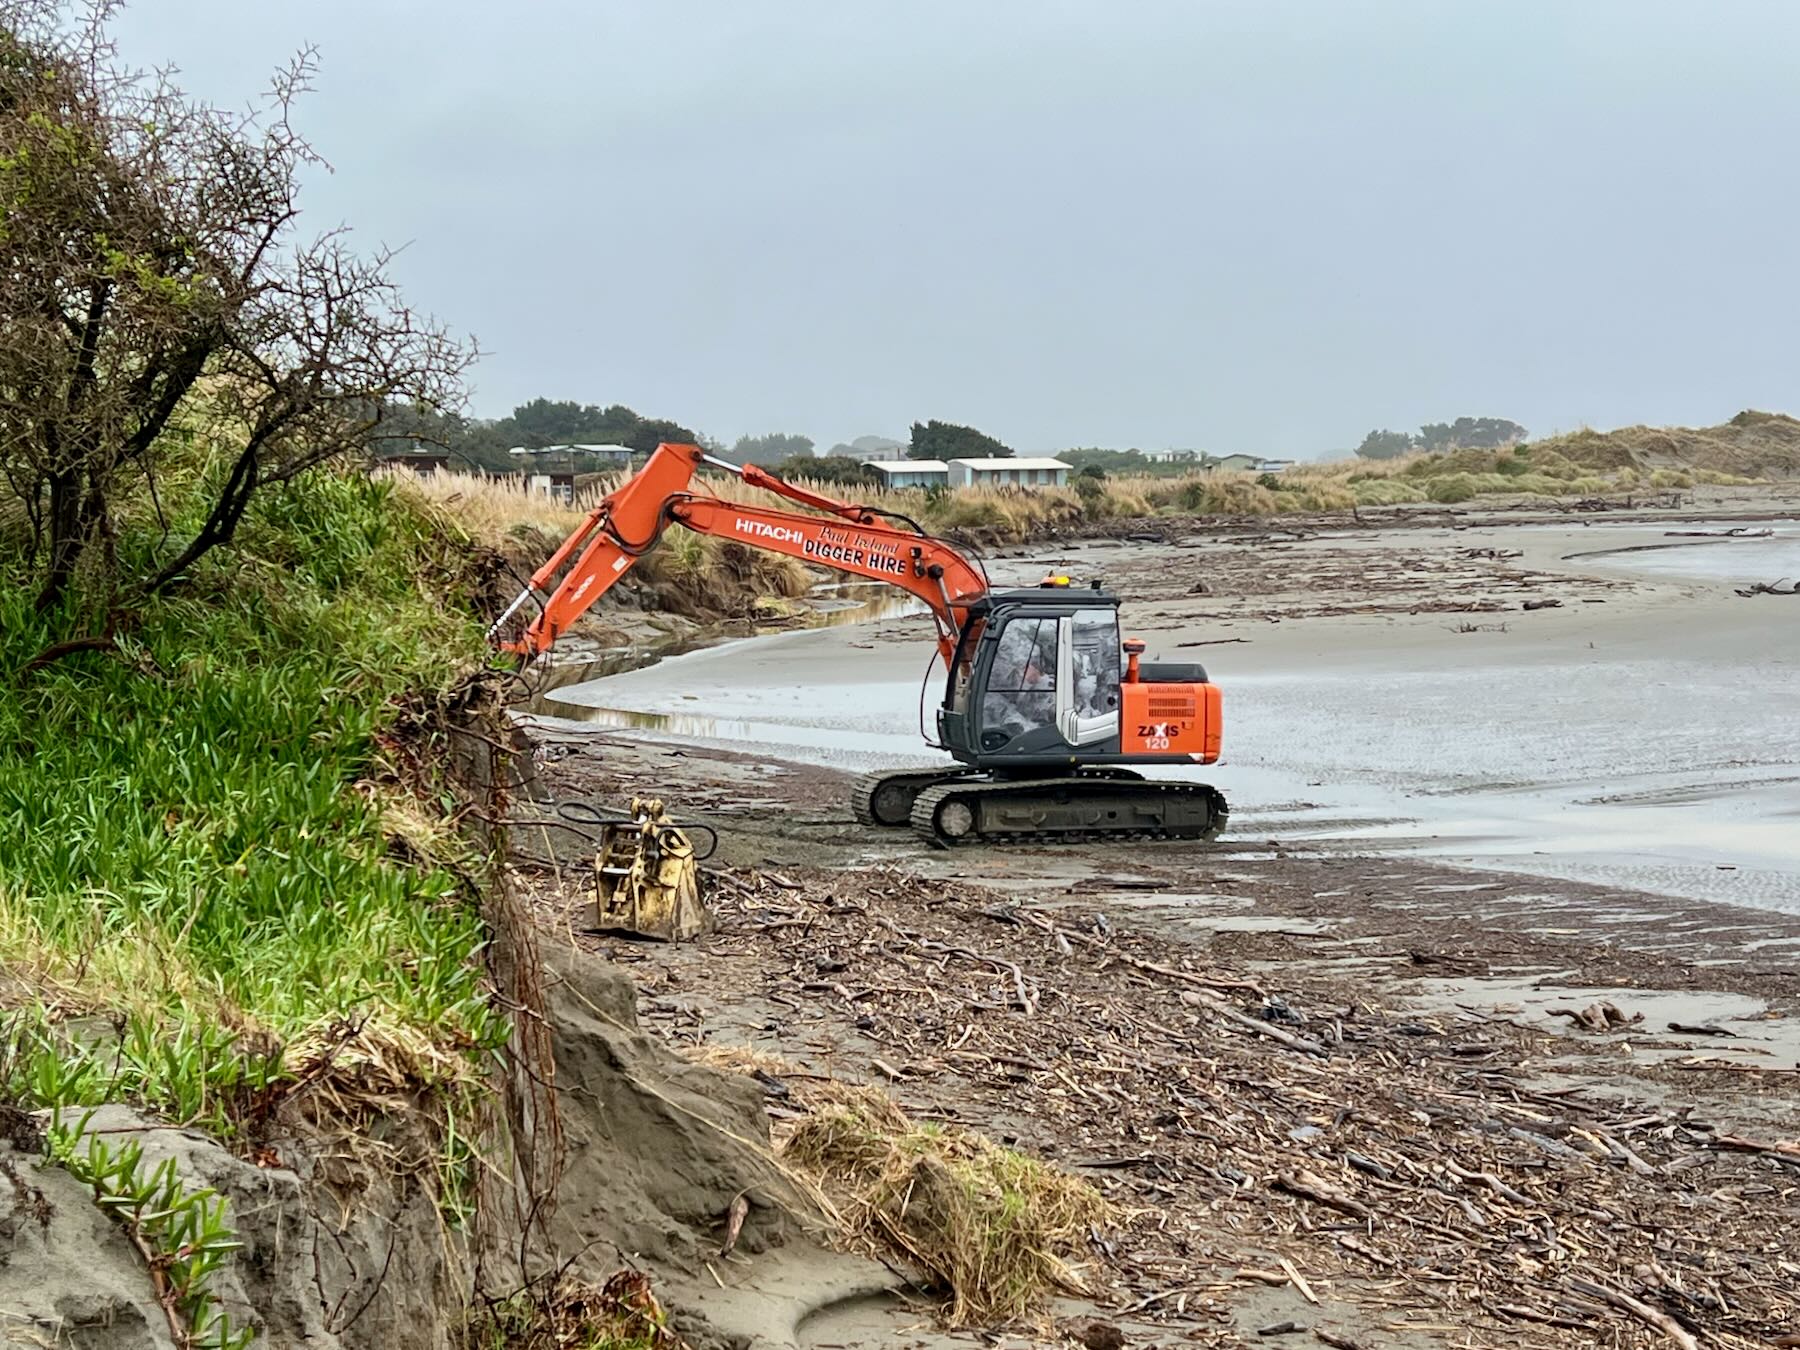 The digger works on the beach end of the track. 